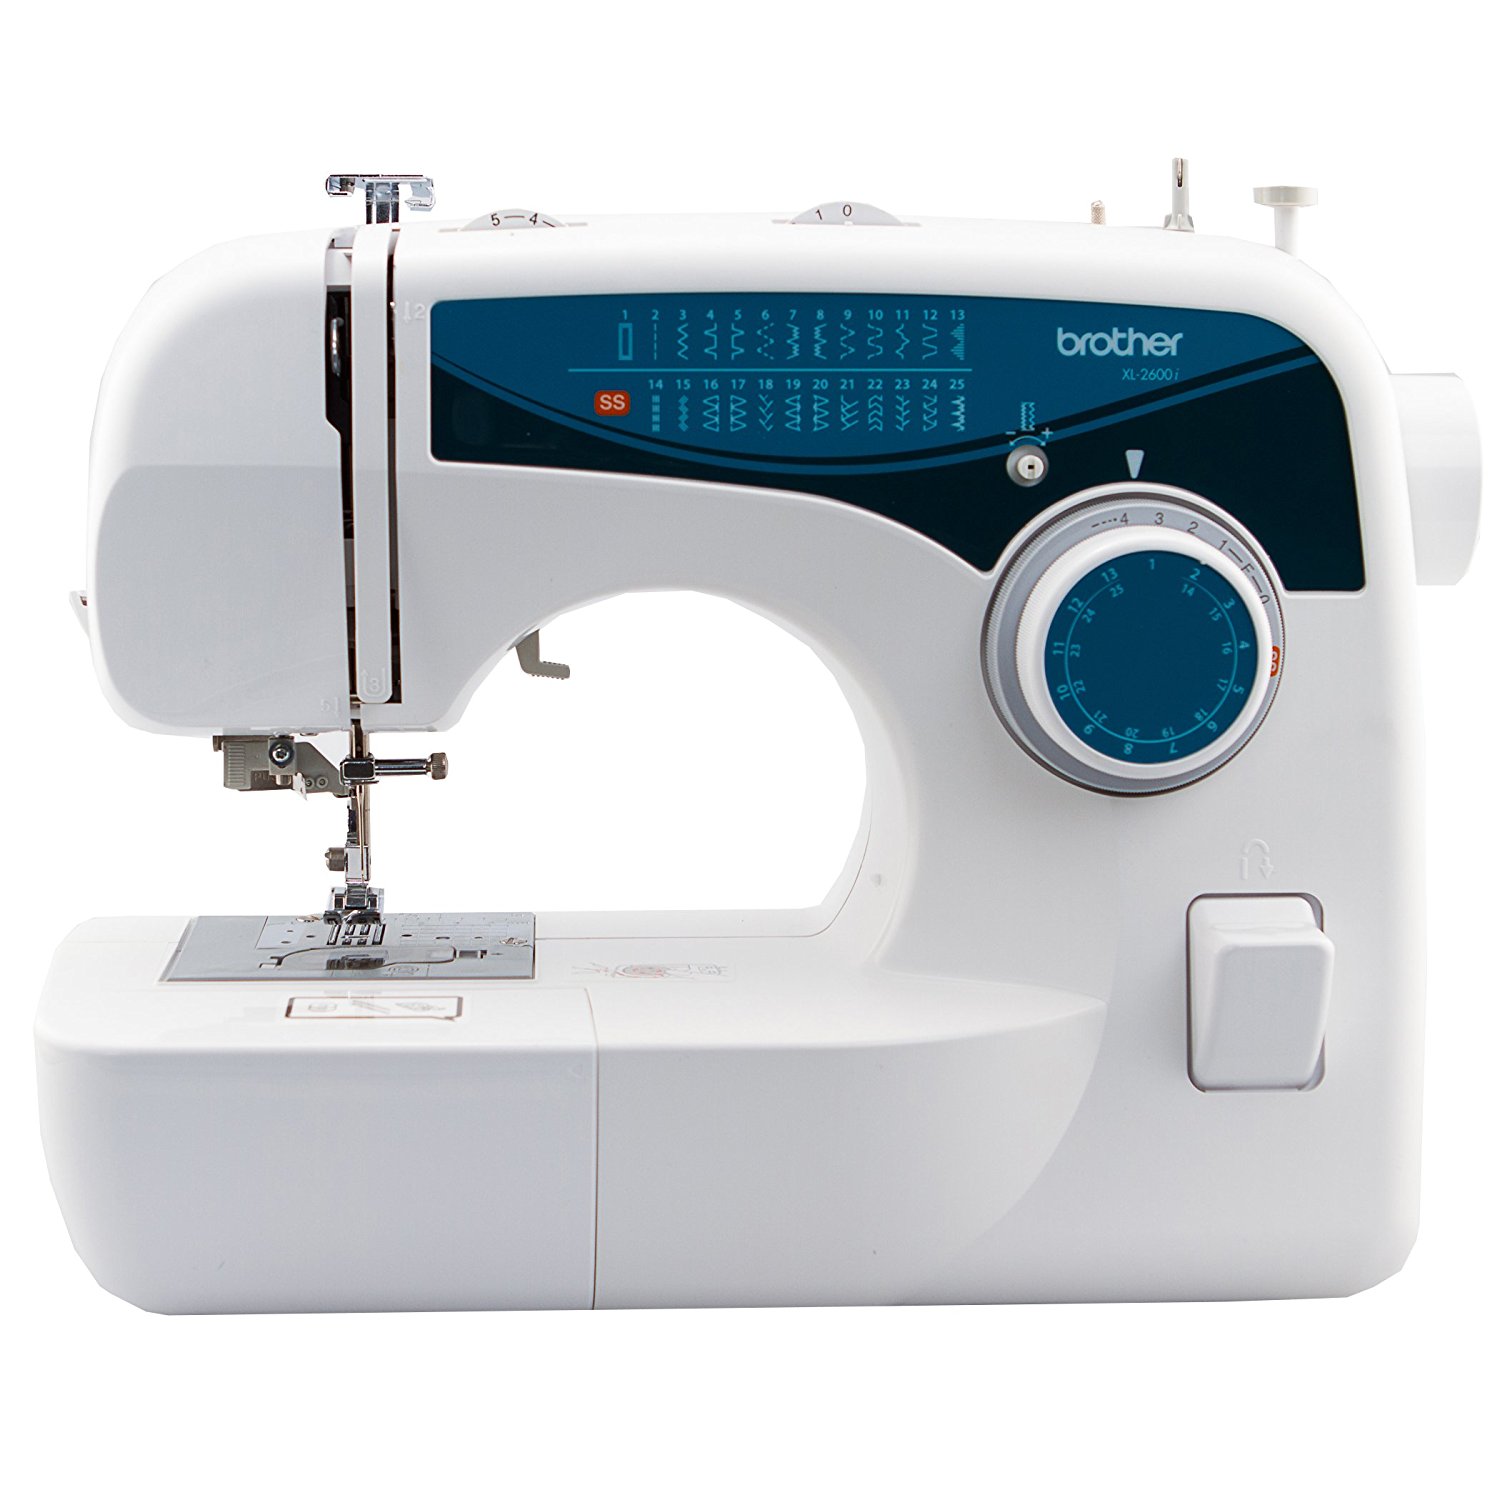 Brother XL2600I Sewing Machine Review